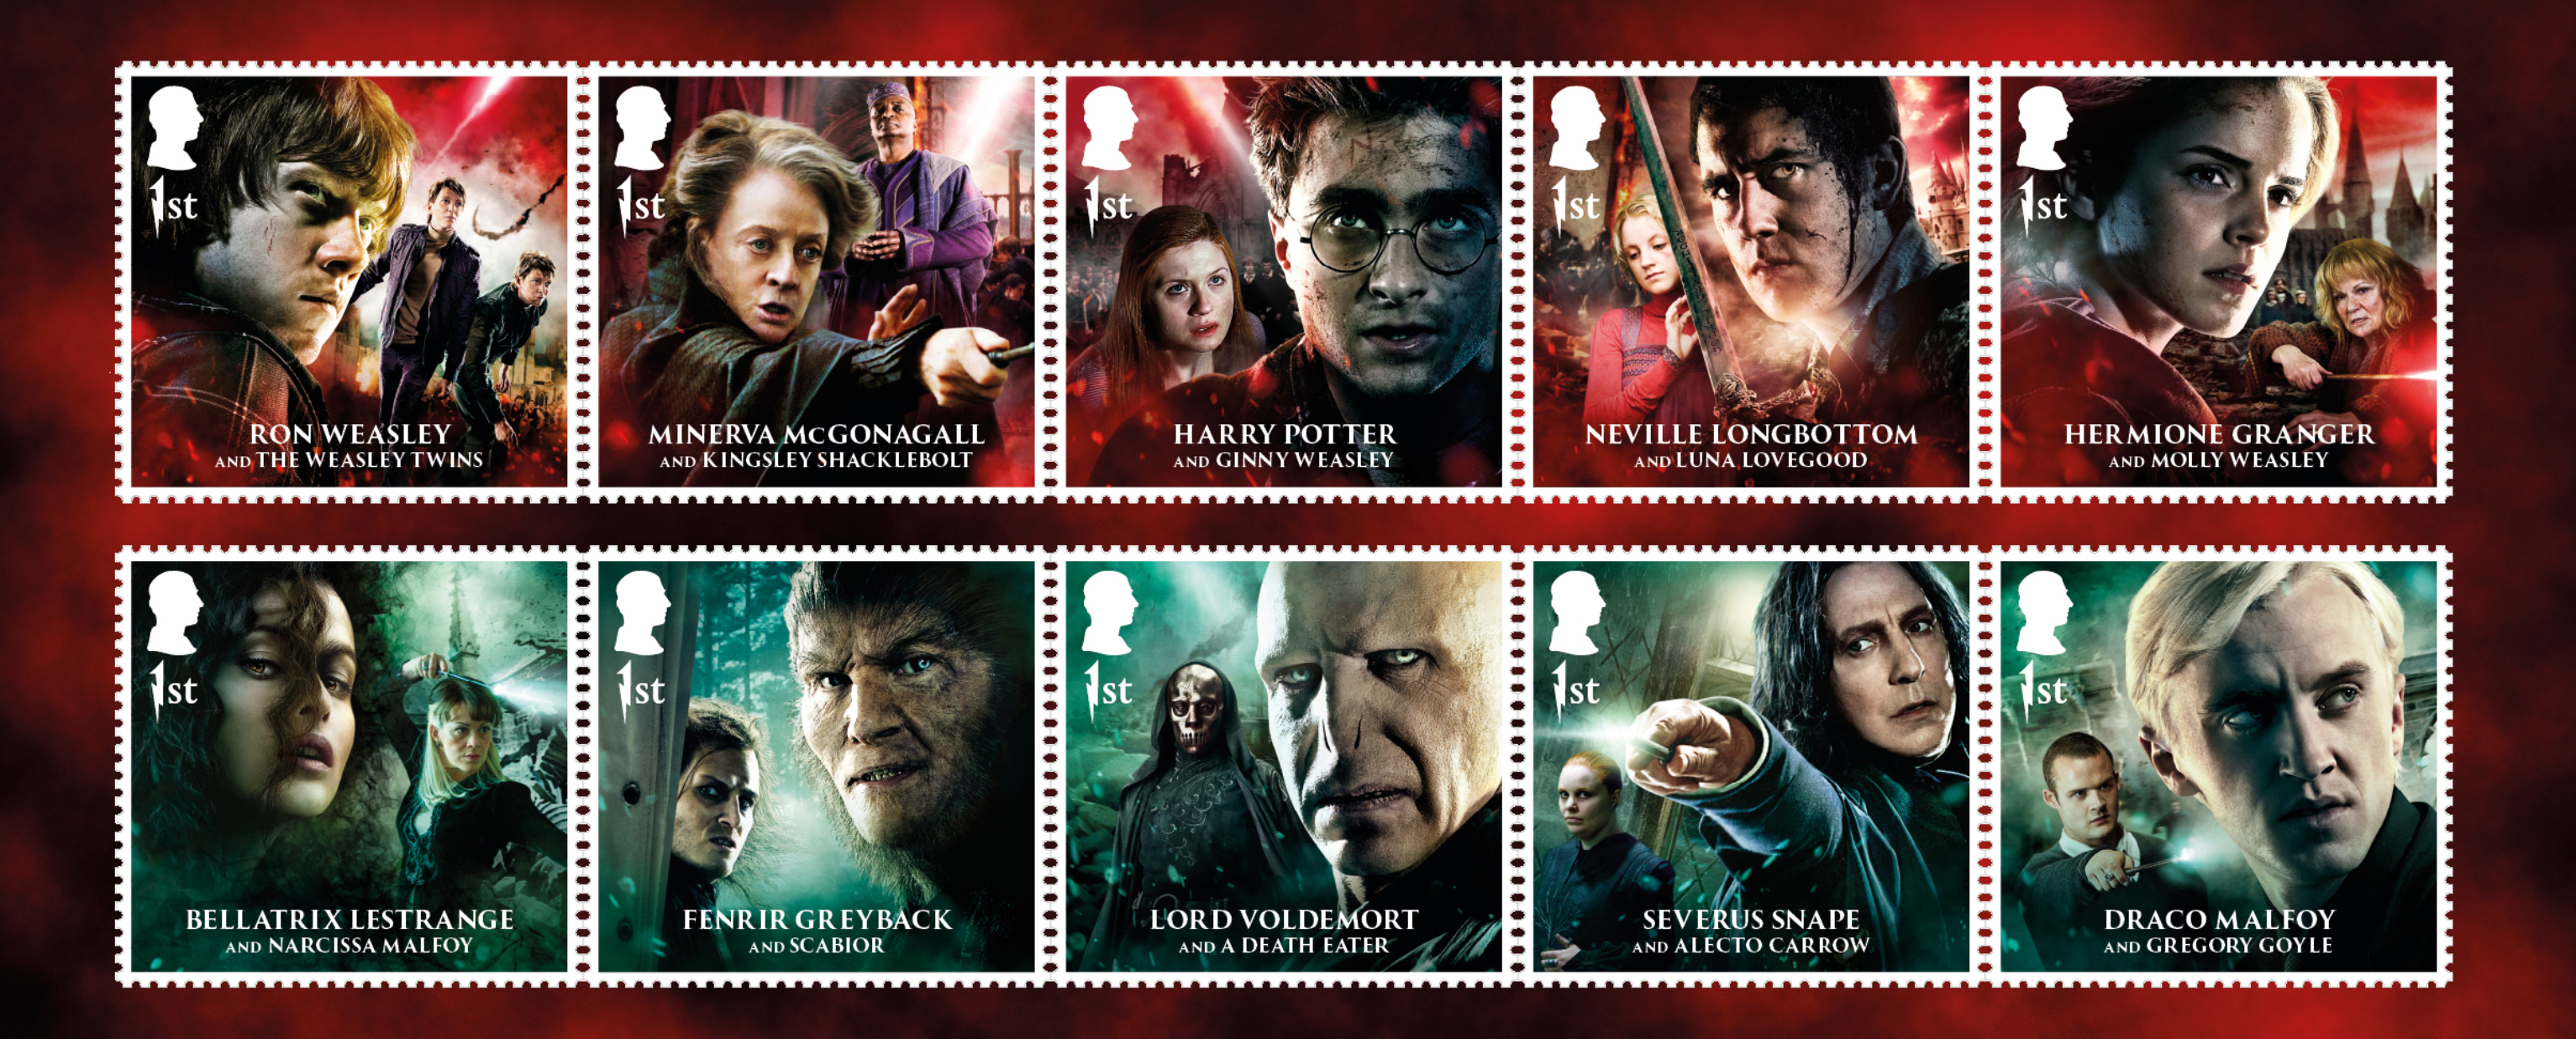 Royal Mail release special Harry Potter Battle of Hogwarts stamp collection